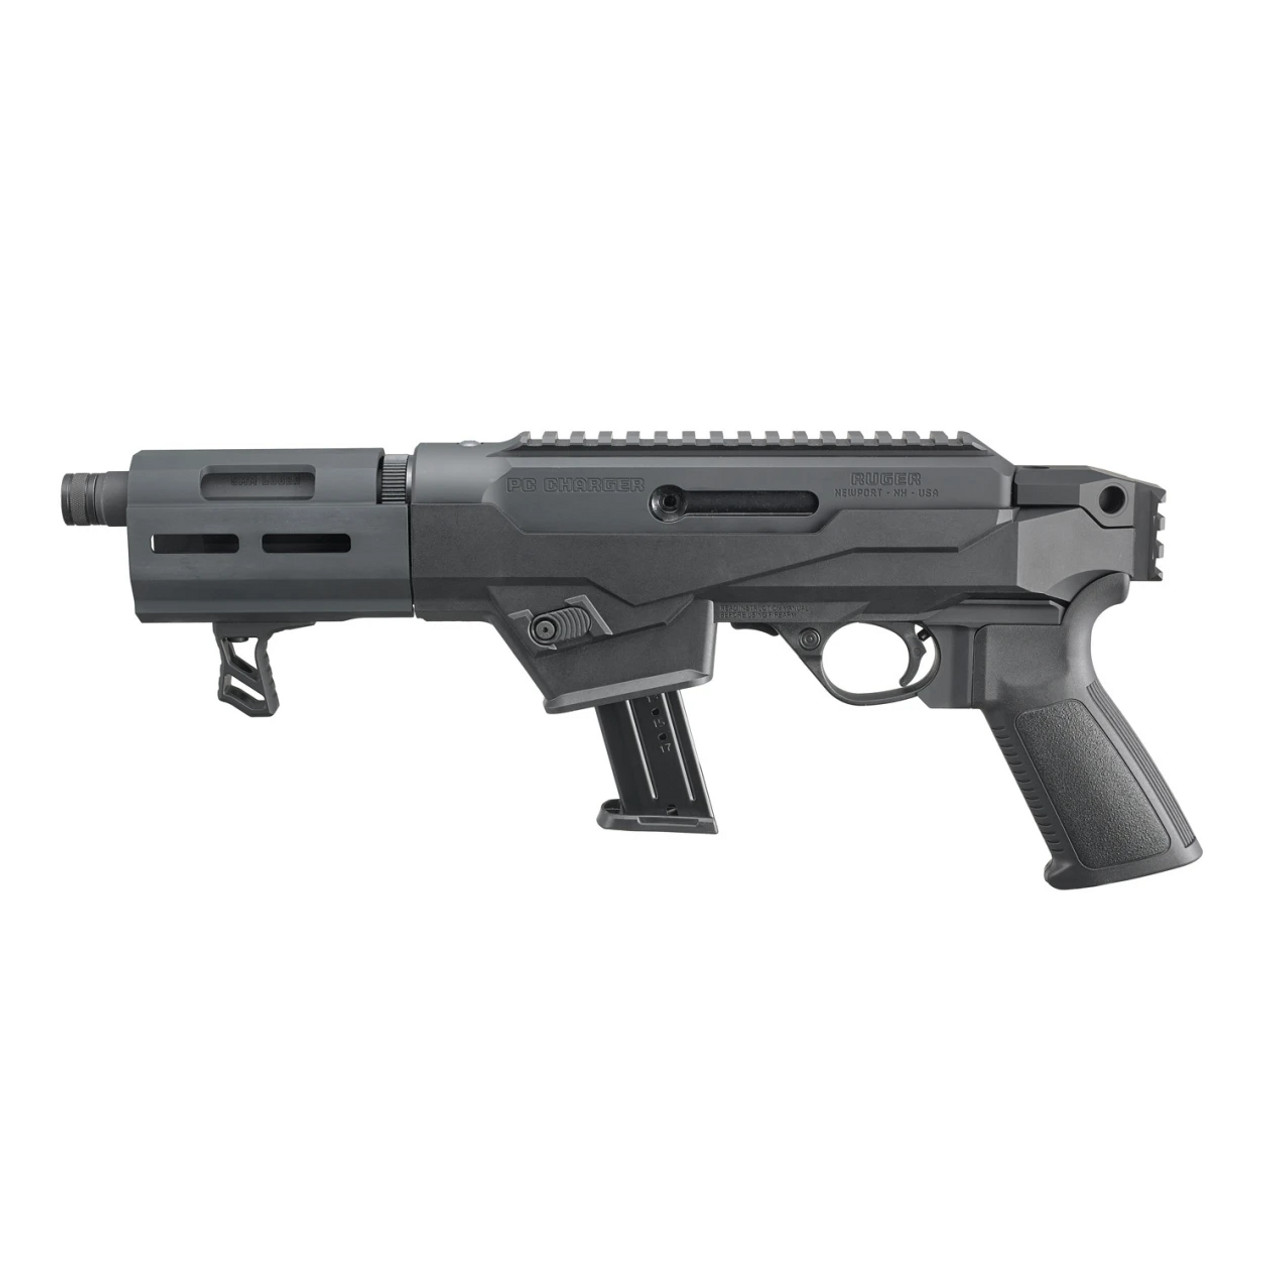 RUGER PC CHARGER 9MM 6.5'' 17-RD PISTOL